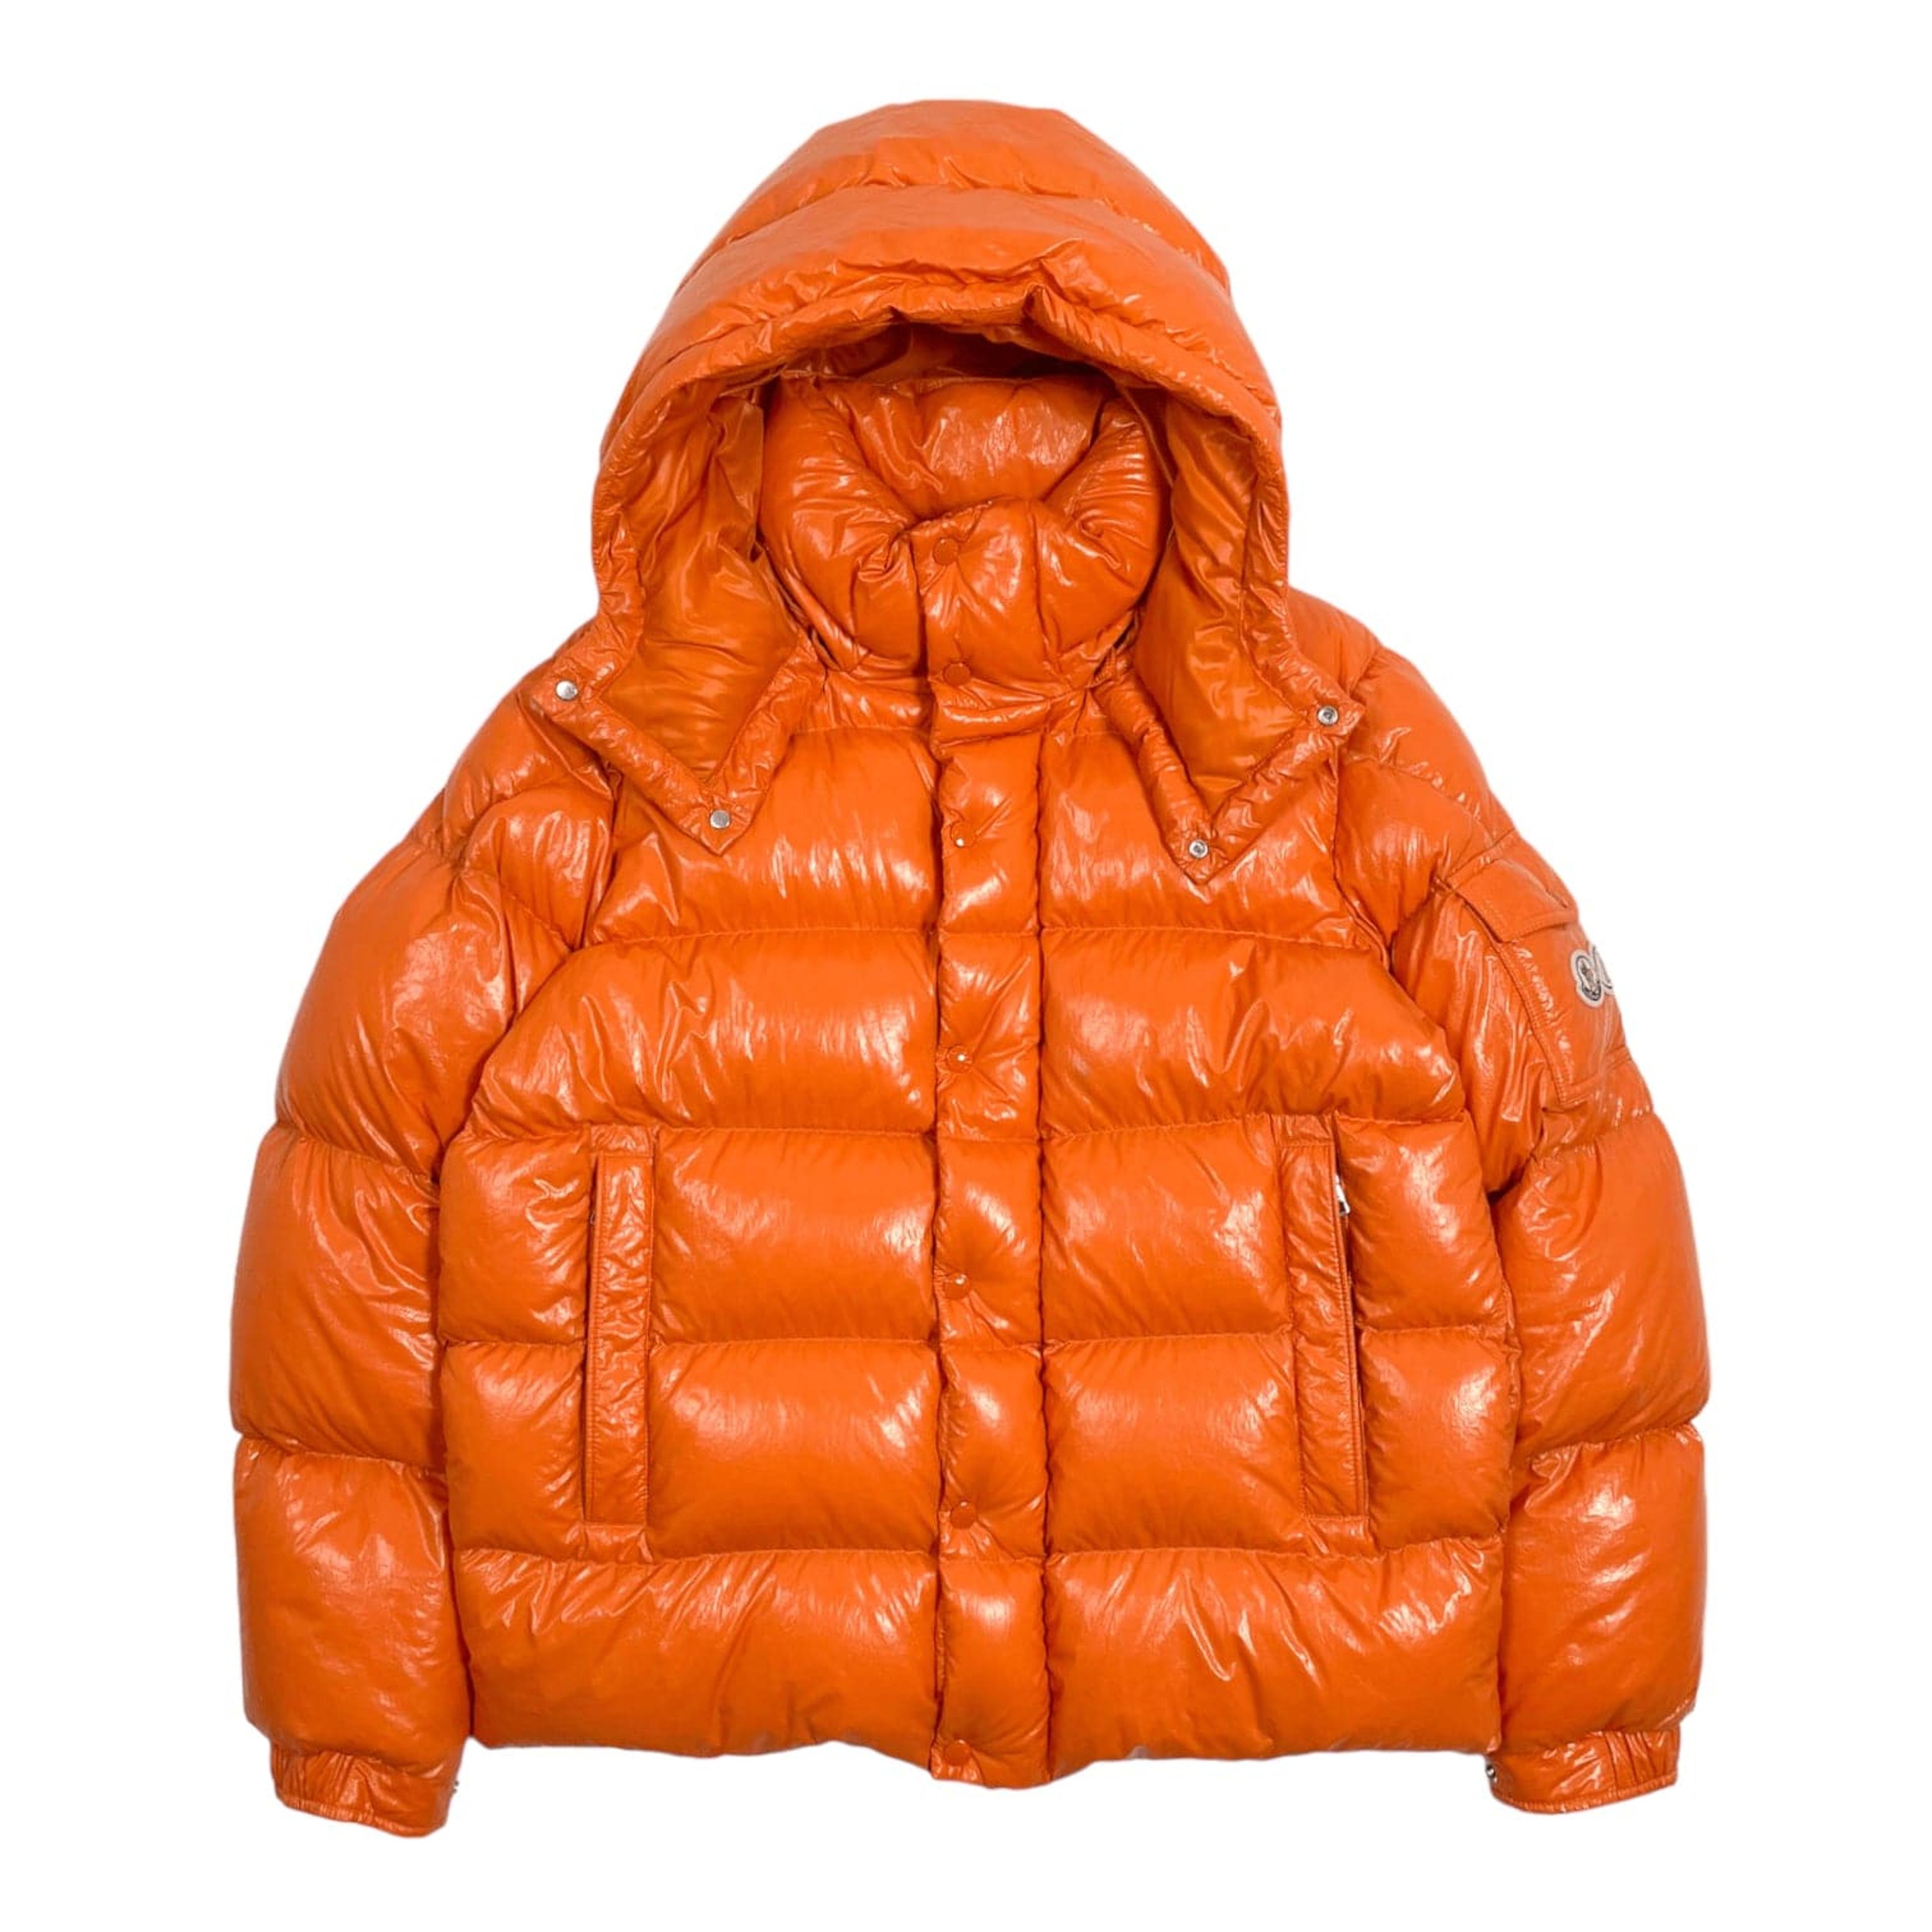 Alternate View 2 of Moncler Maya 70th Anniversary Special Edition Campfire Orange